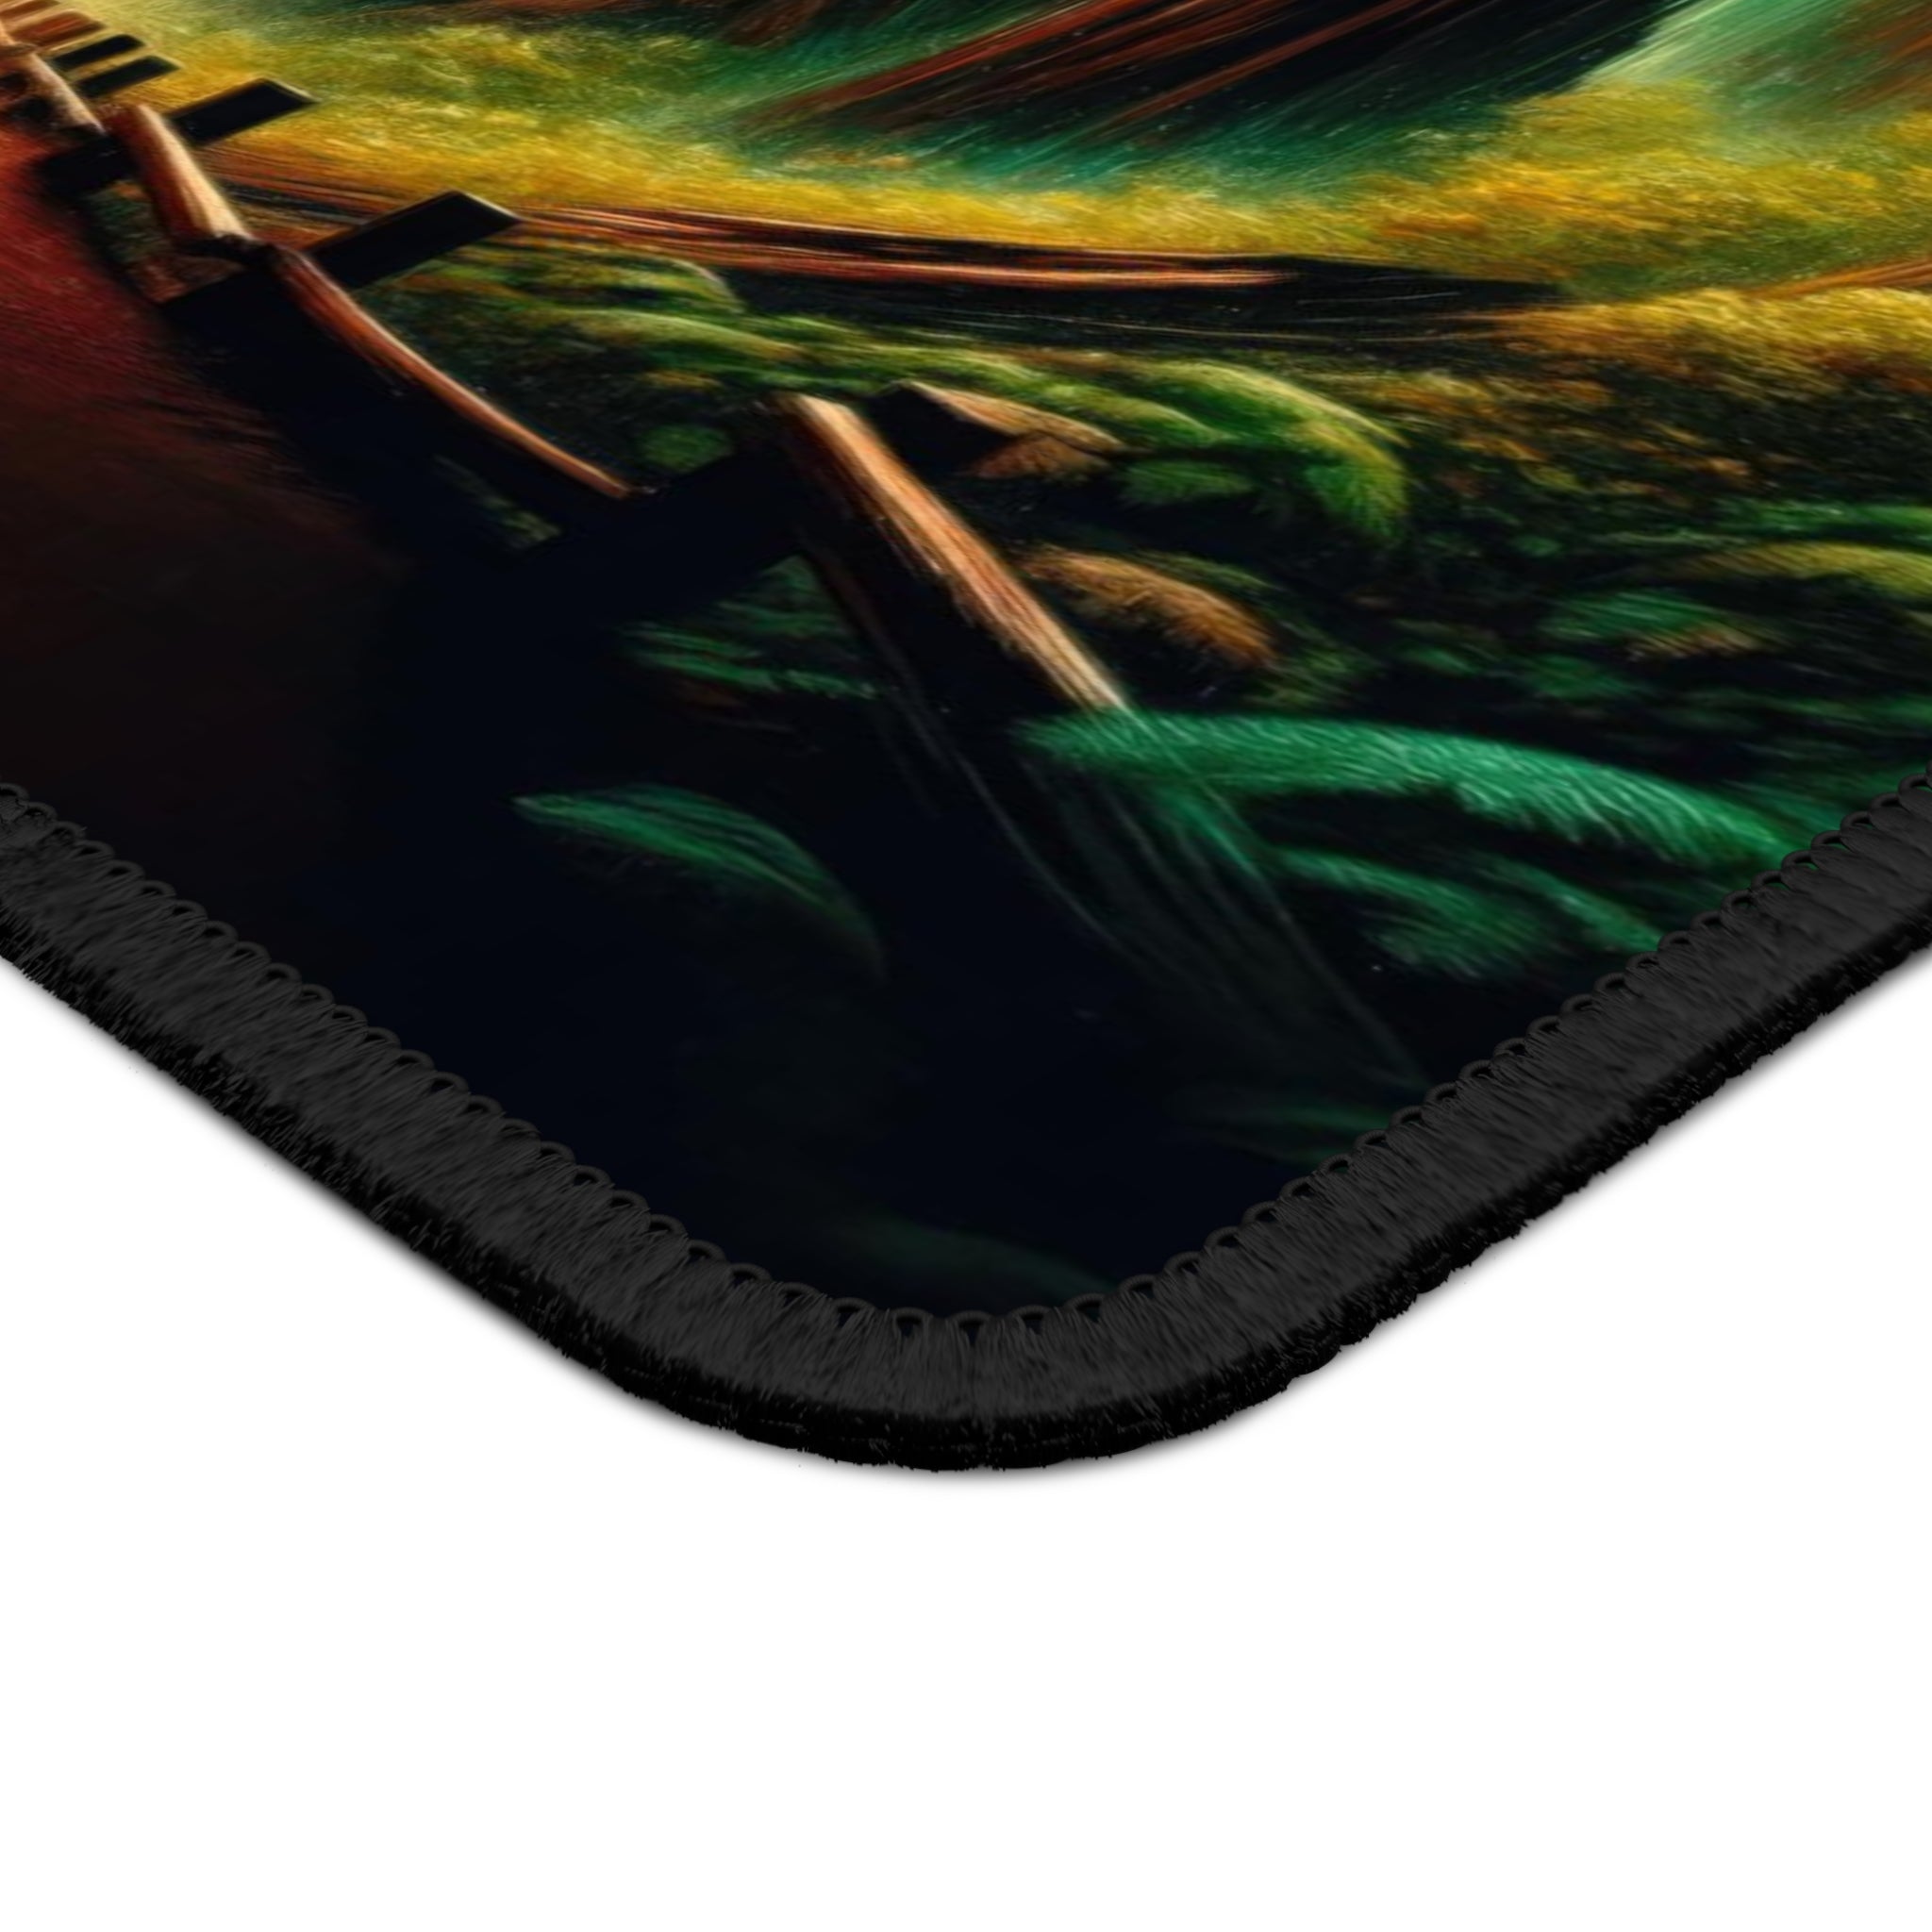 Under the Redwood Canopy Gaming Mouse Pad